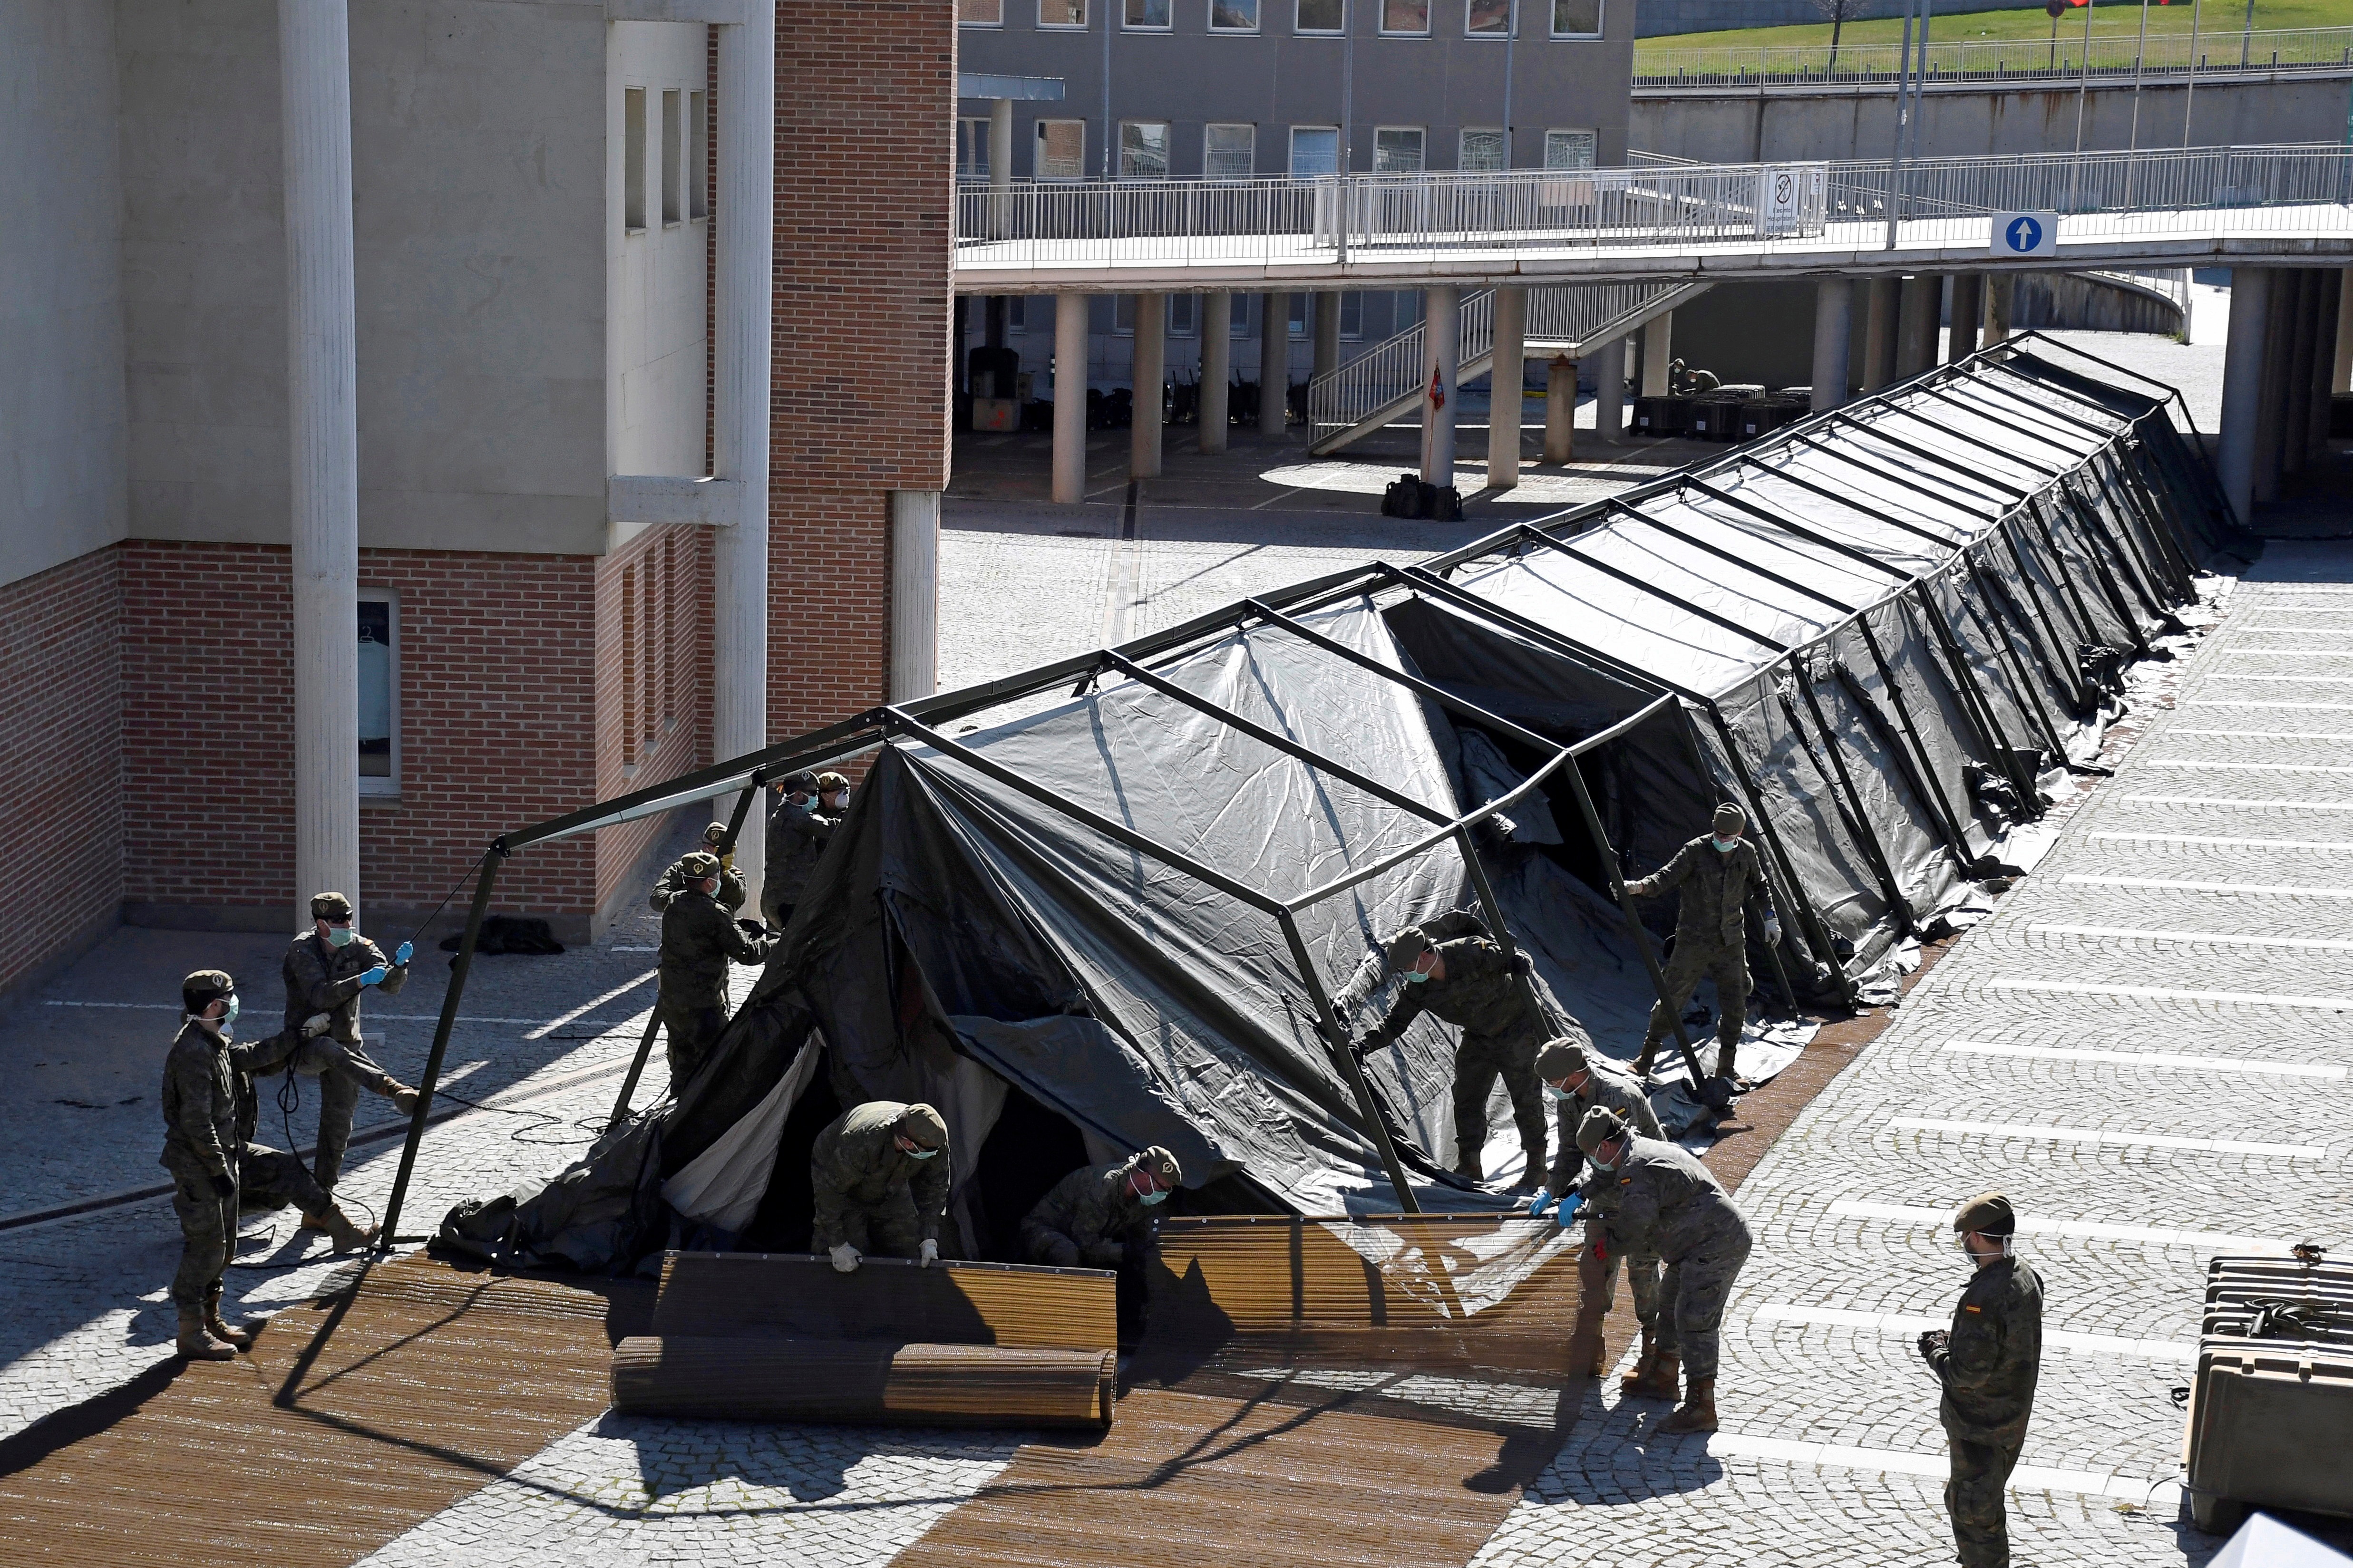 Spain's ground army engineers build a tent for a field hospital next to the Segovia Hospital in Segovia, Spain